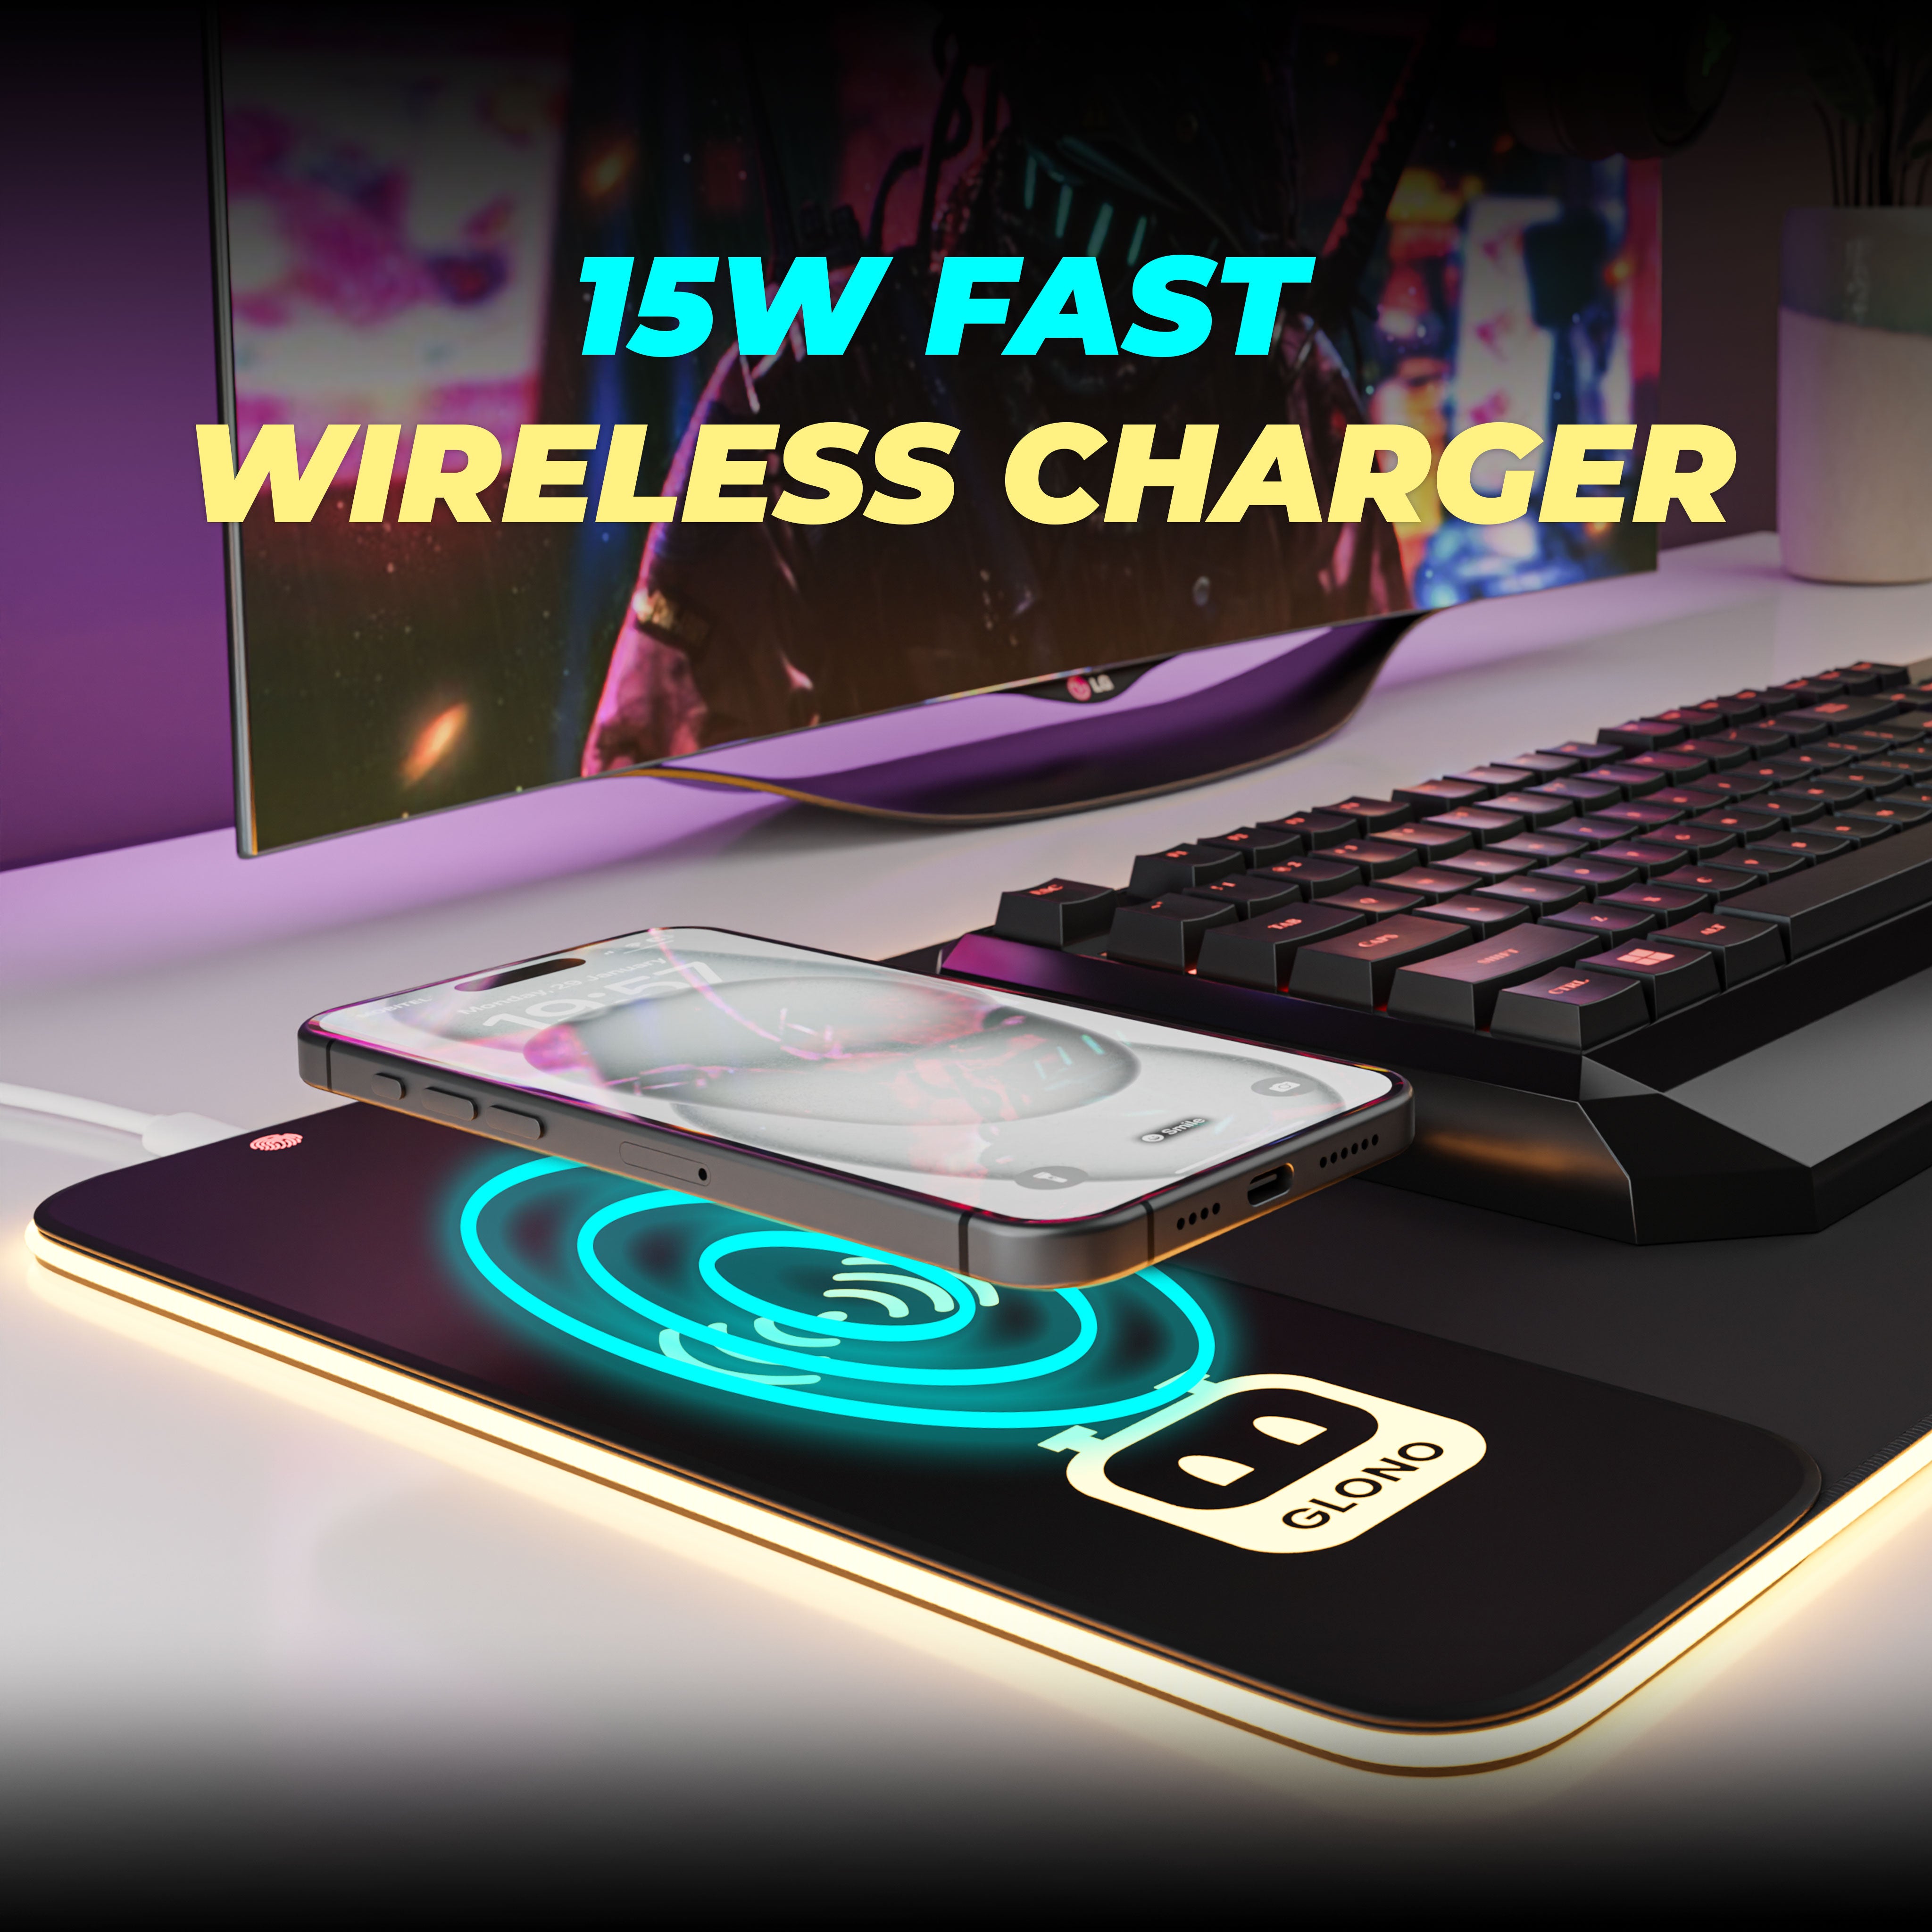 JCBL Accessories Illumicharge 2-in-1  RGB Mouse Pad With 15W Fast Wireless Charger -  The Matt Black Theme